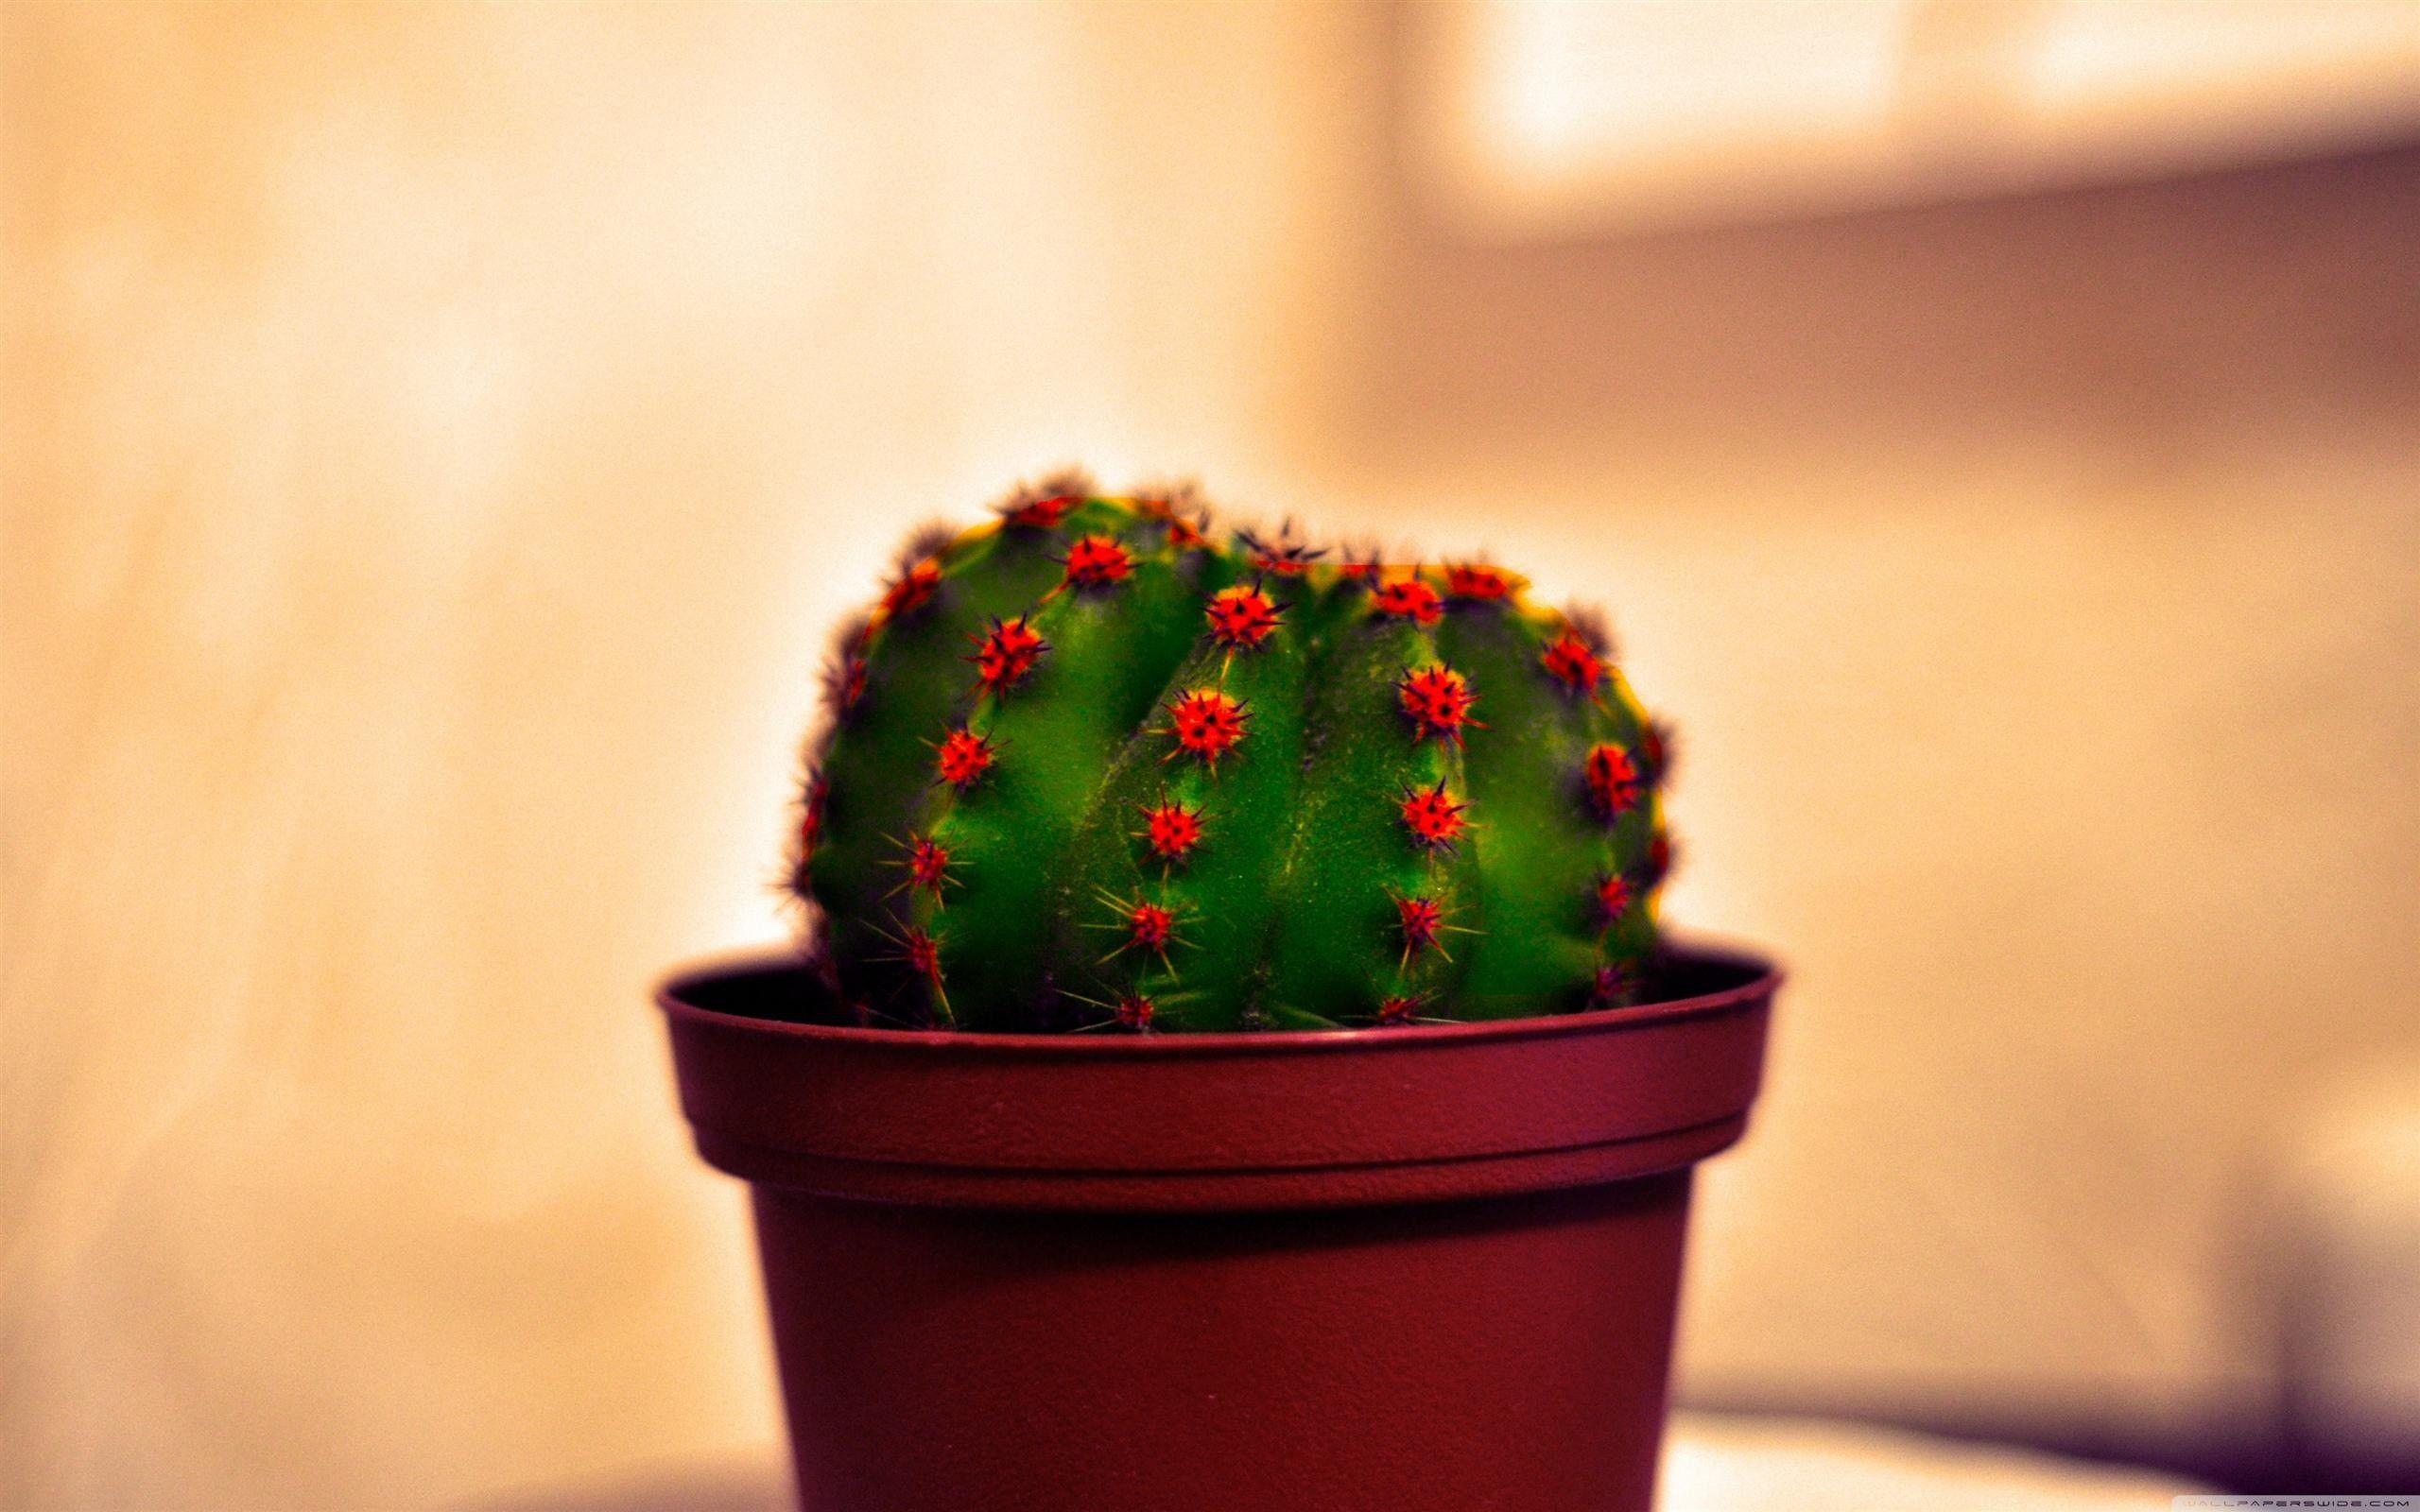 Potted Cactus wallpaper. Potted Cactus